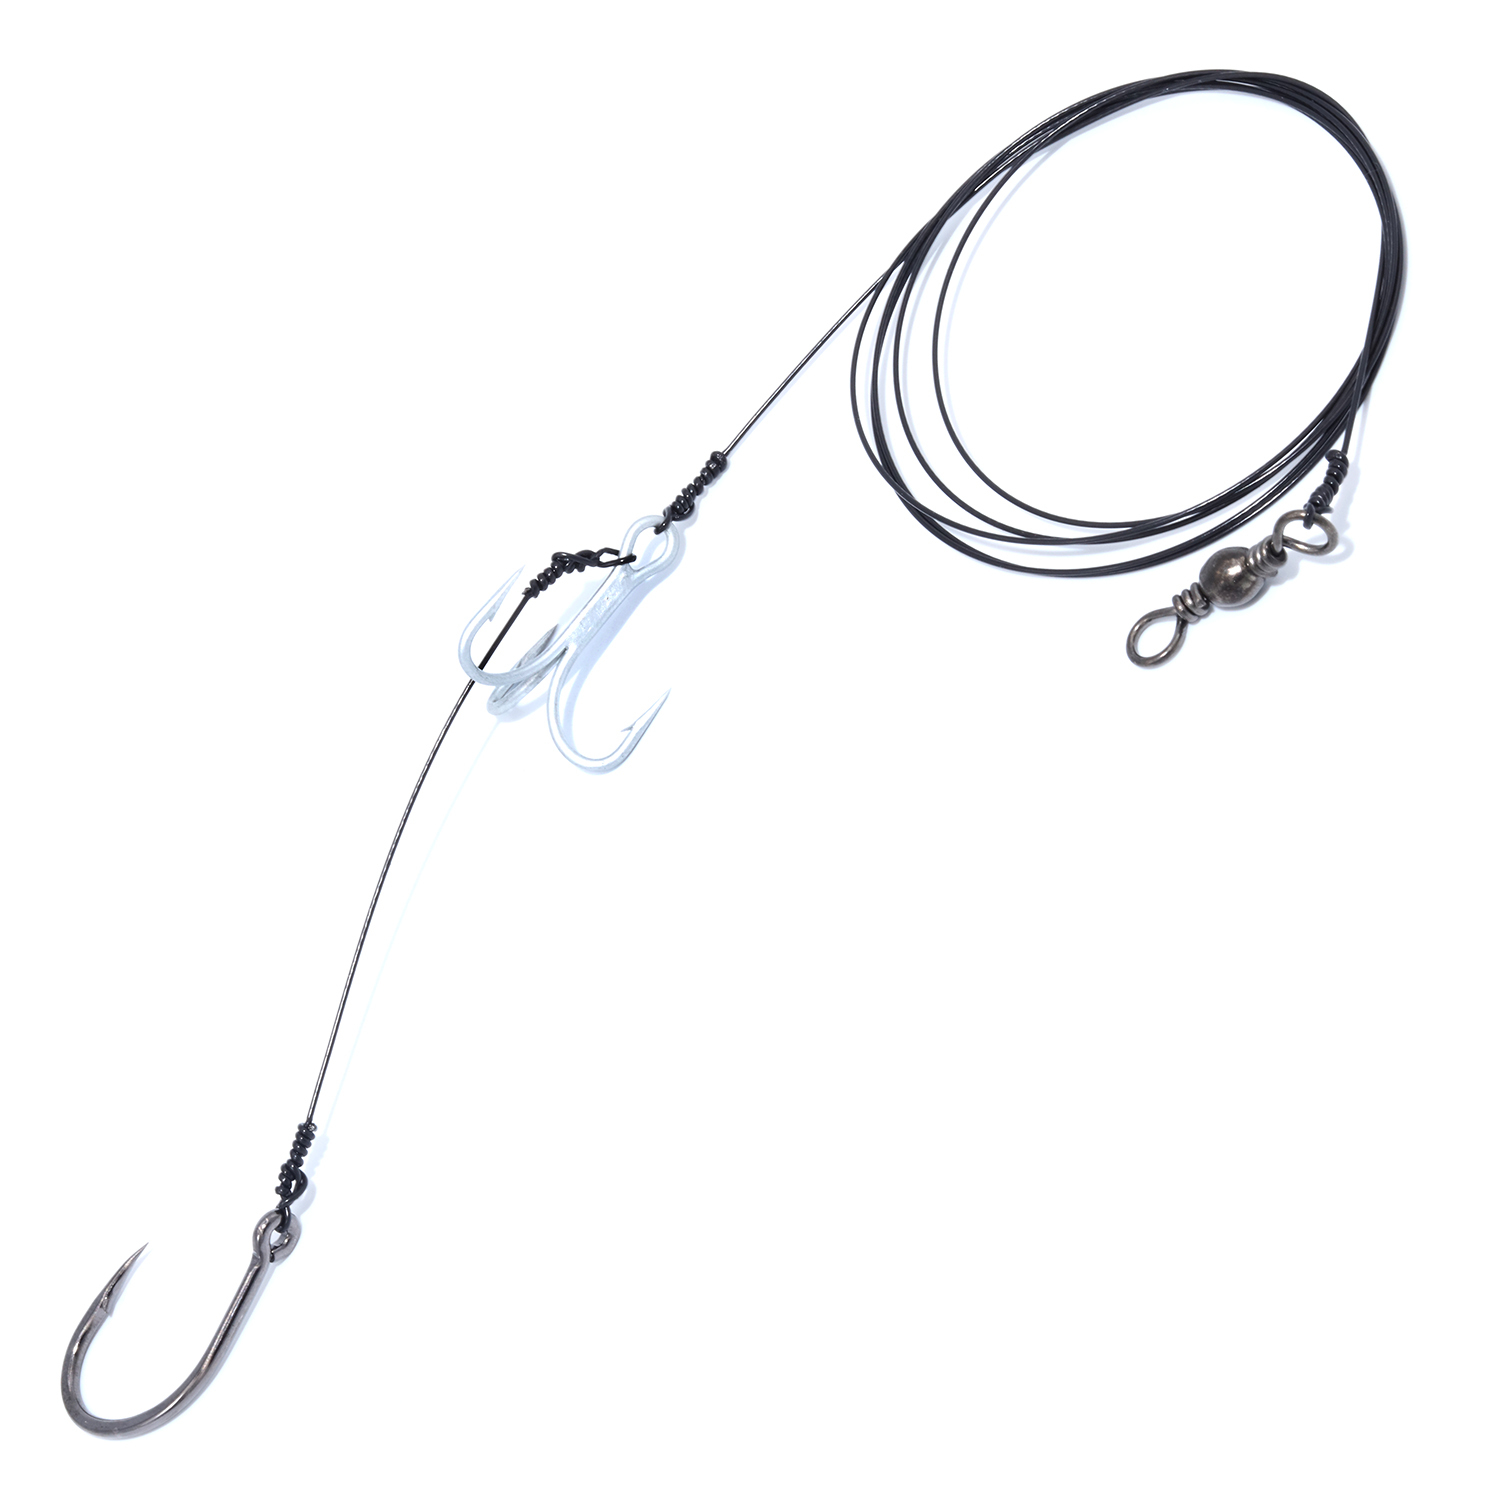 American Wire Rig with hook size 0/10 and treble hook size 0/3, and wire test 90lb